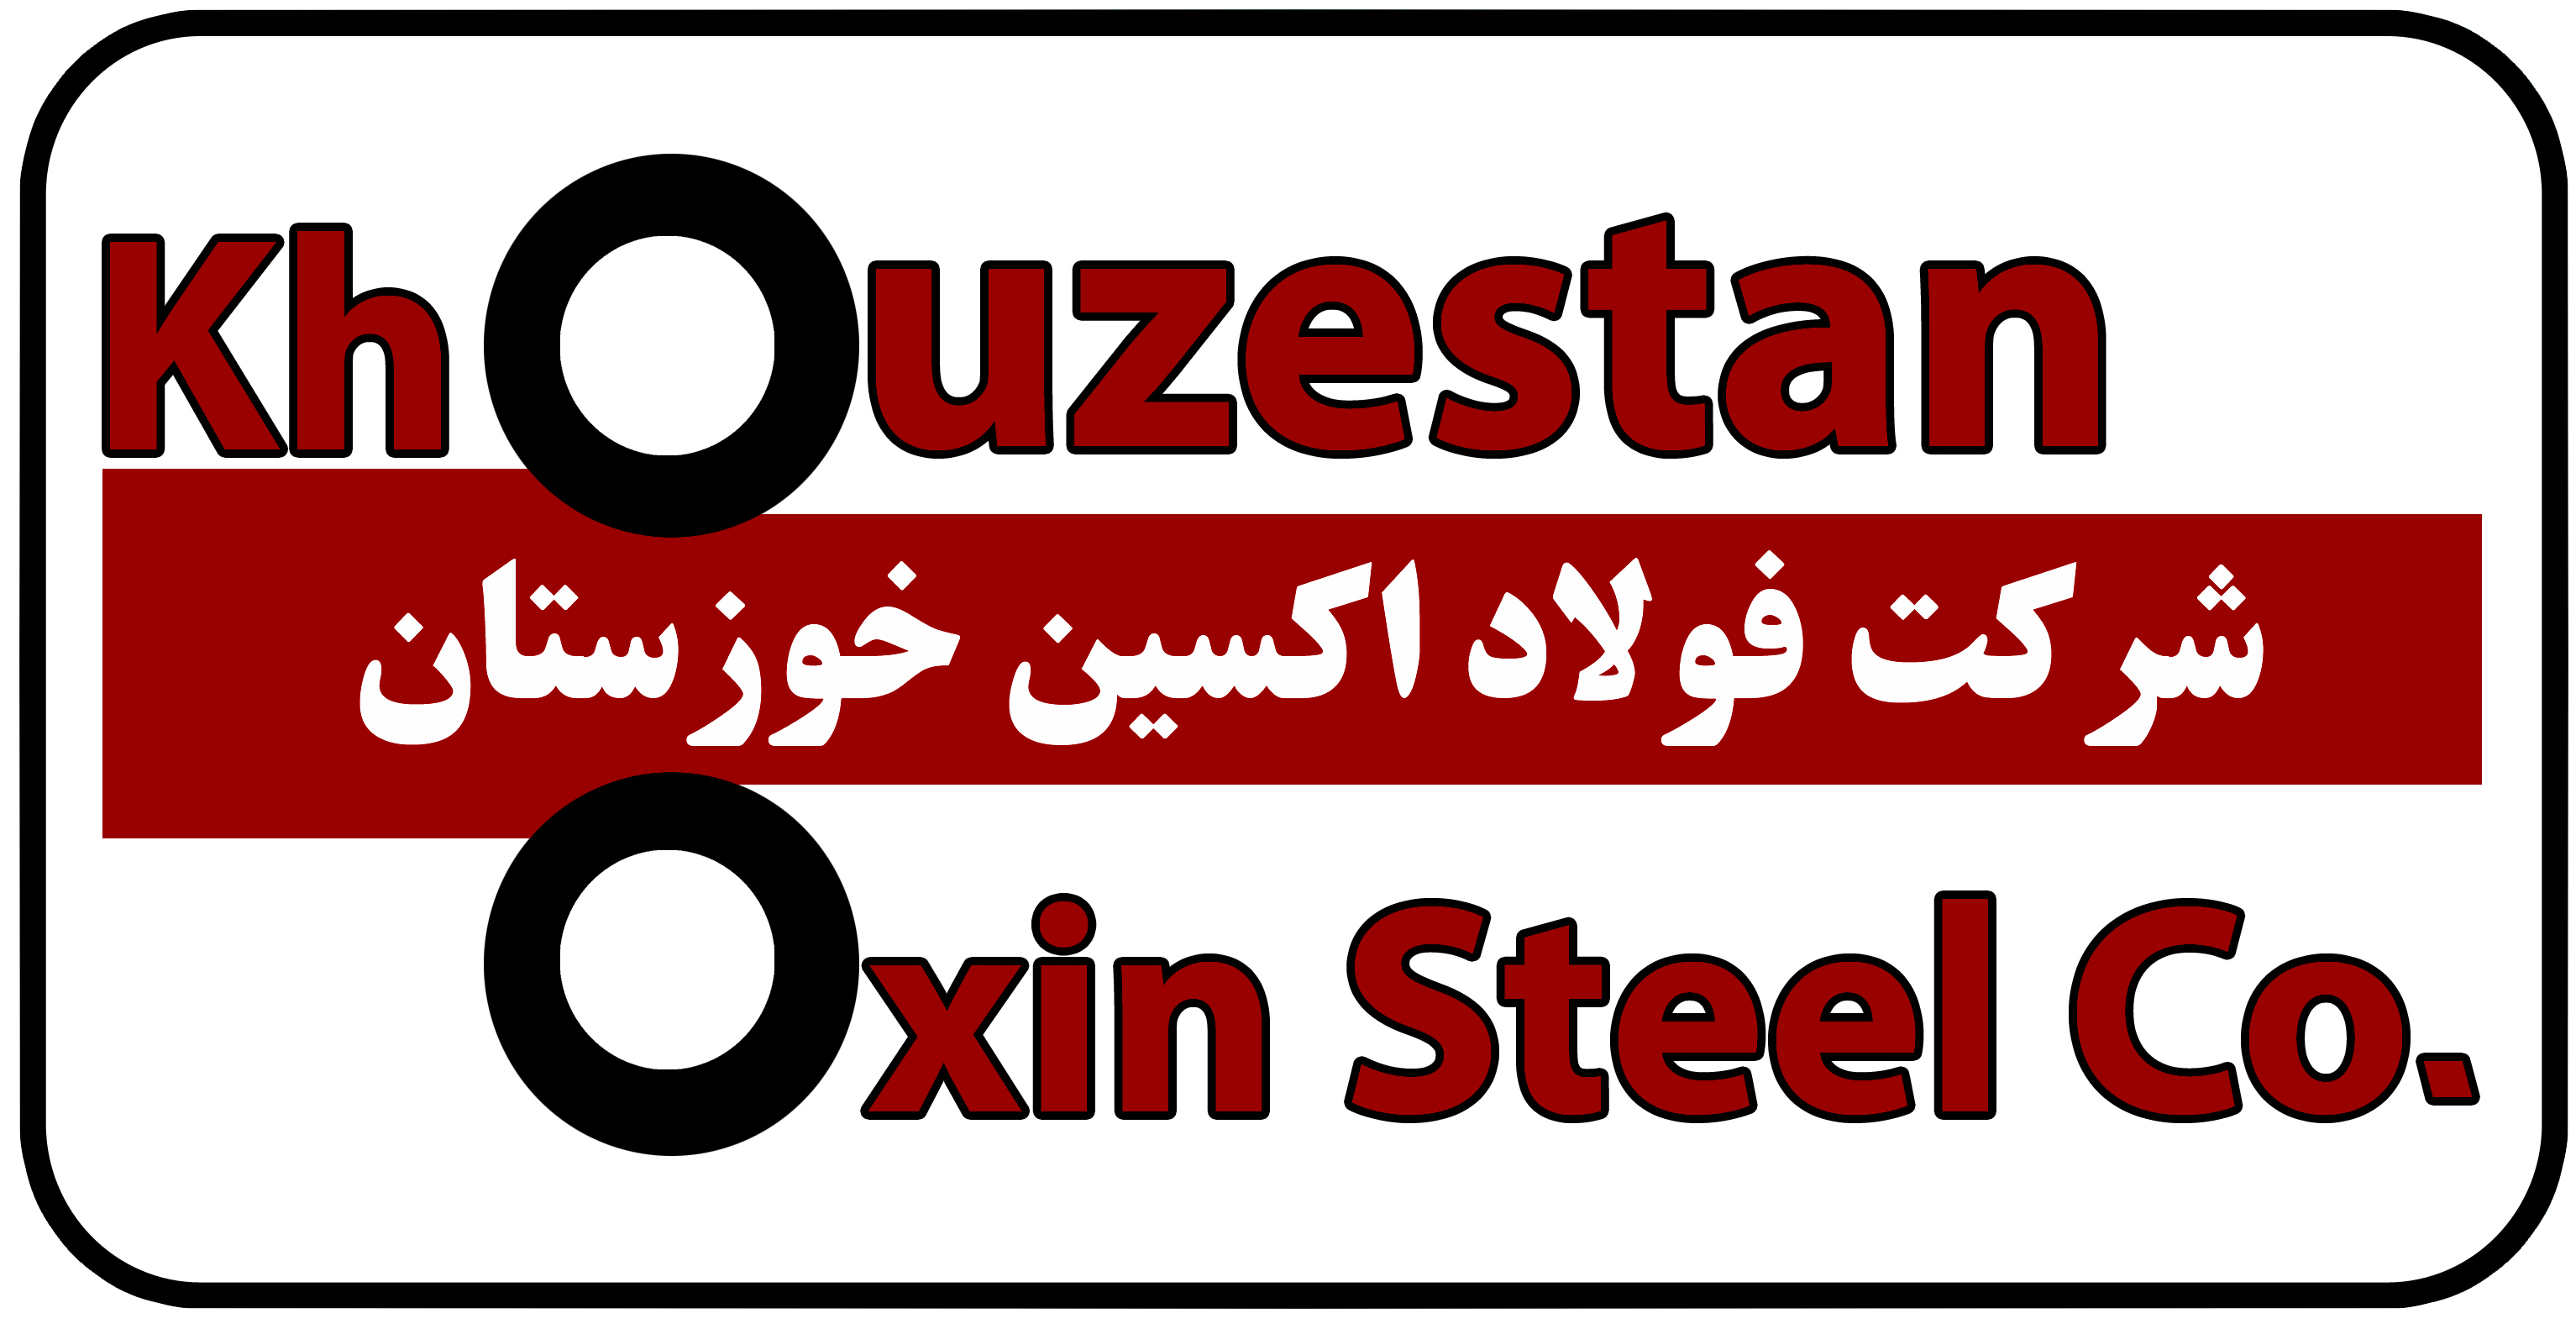 The sale of 31.6% of the Khuzestan Oxin steel for $ 109,523,810